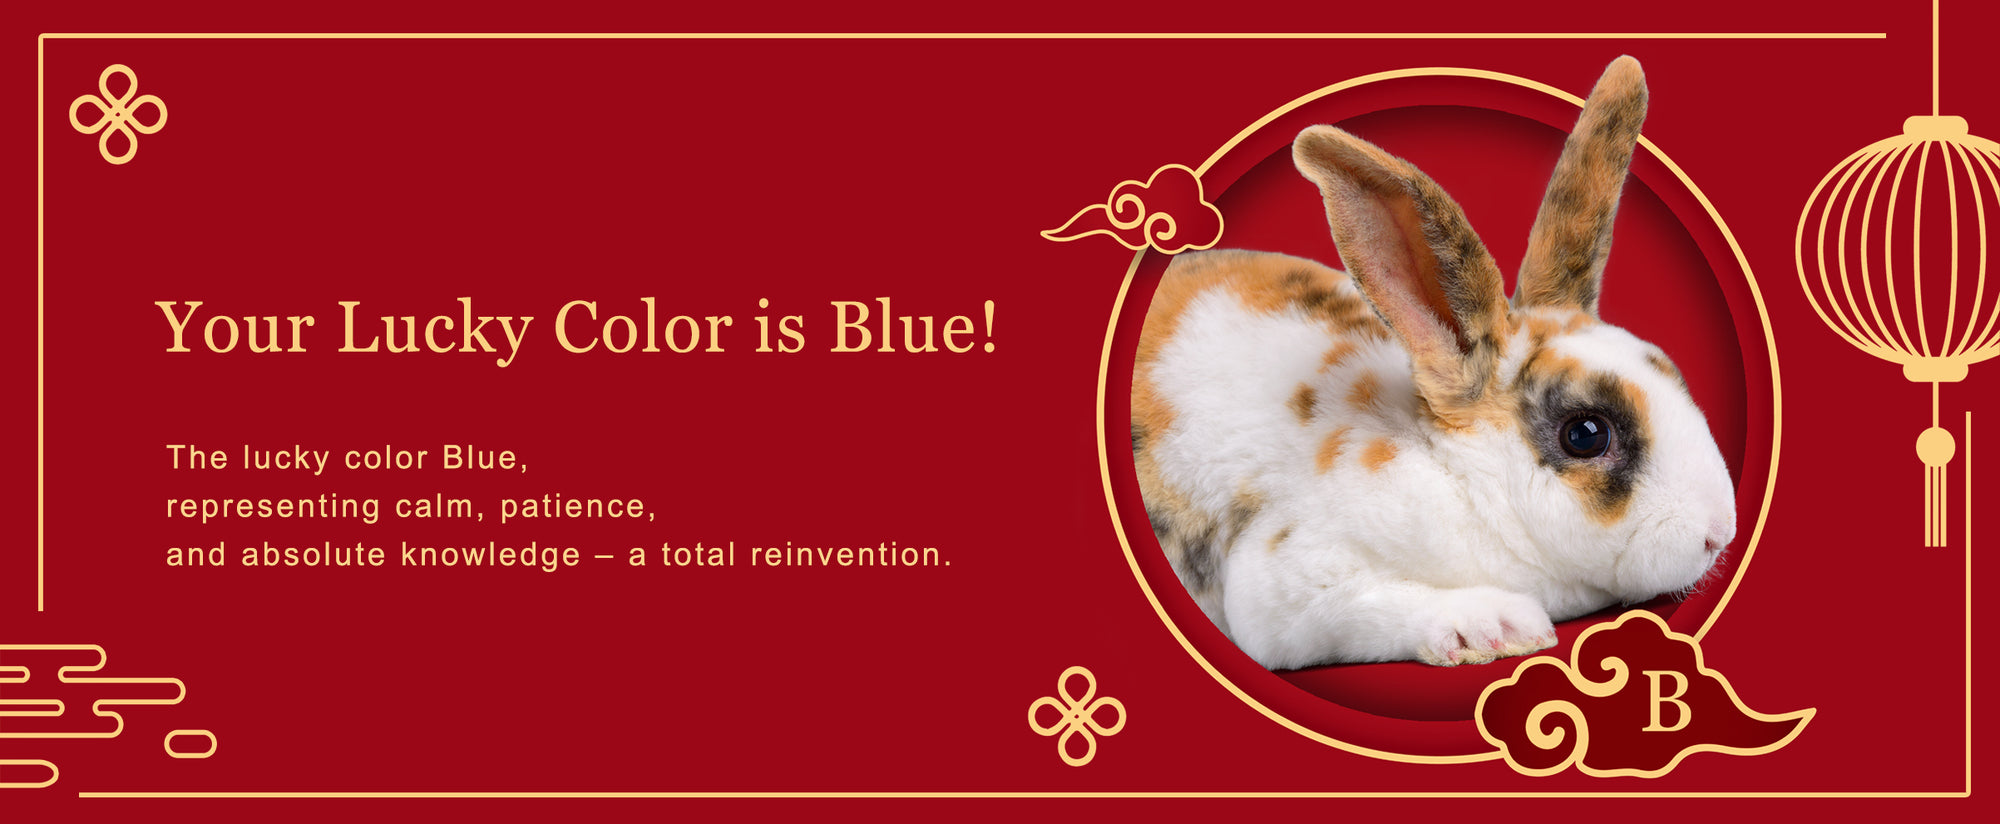 Year of the Rabbit - Blue